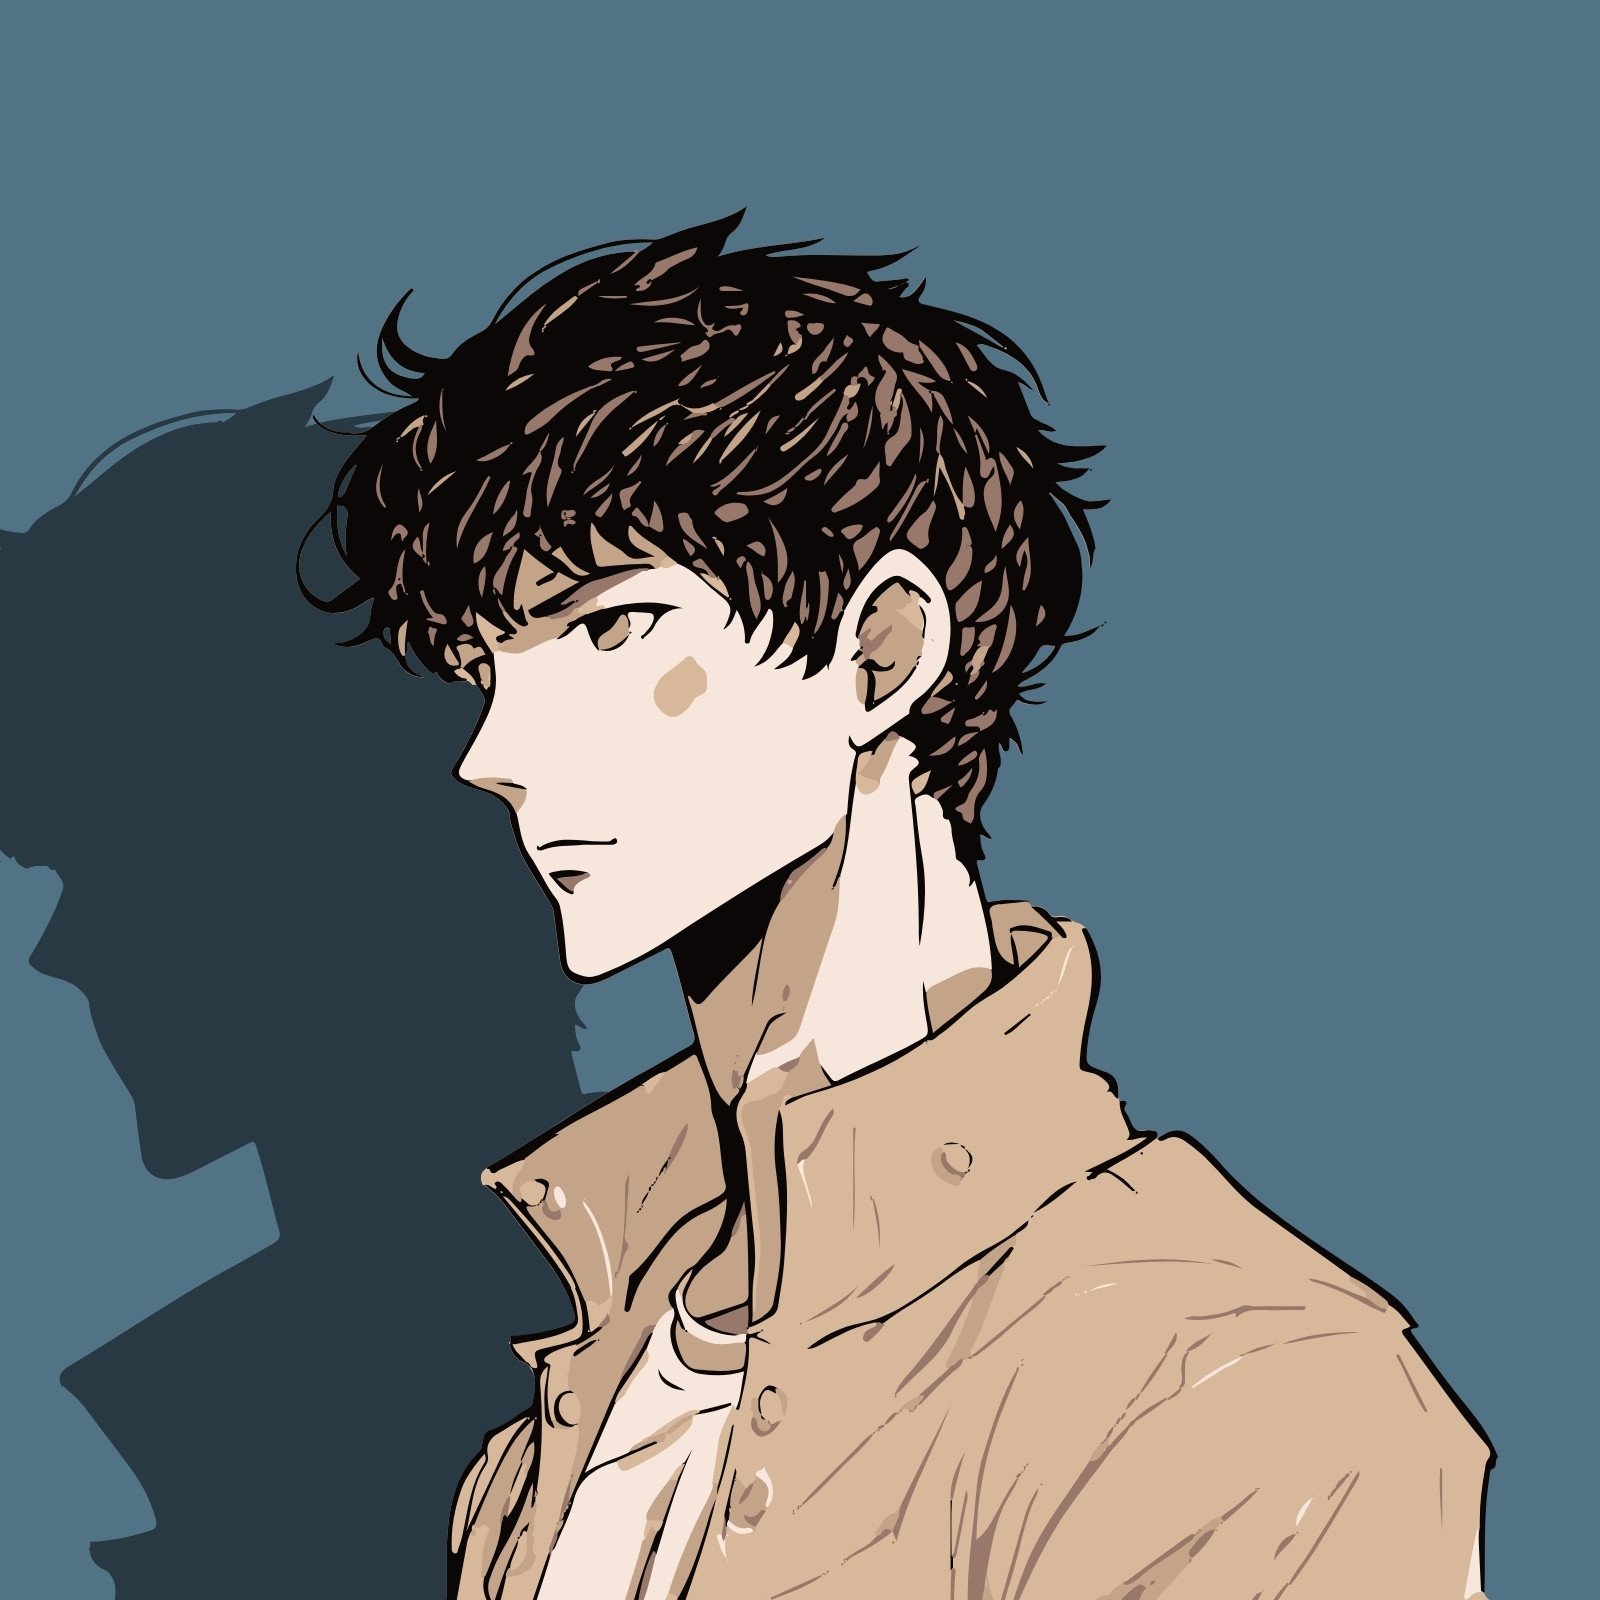 Brown and Blue Illustrative Anime Cool Mysterious Man Avatar 